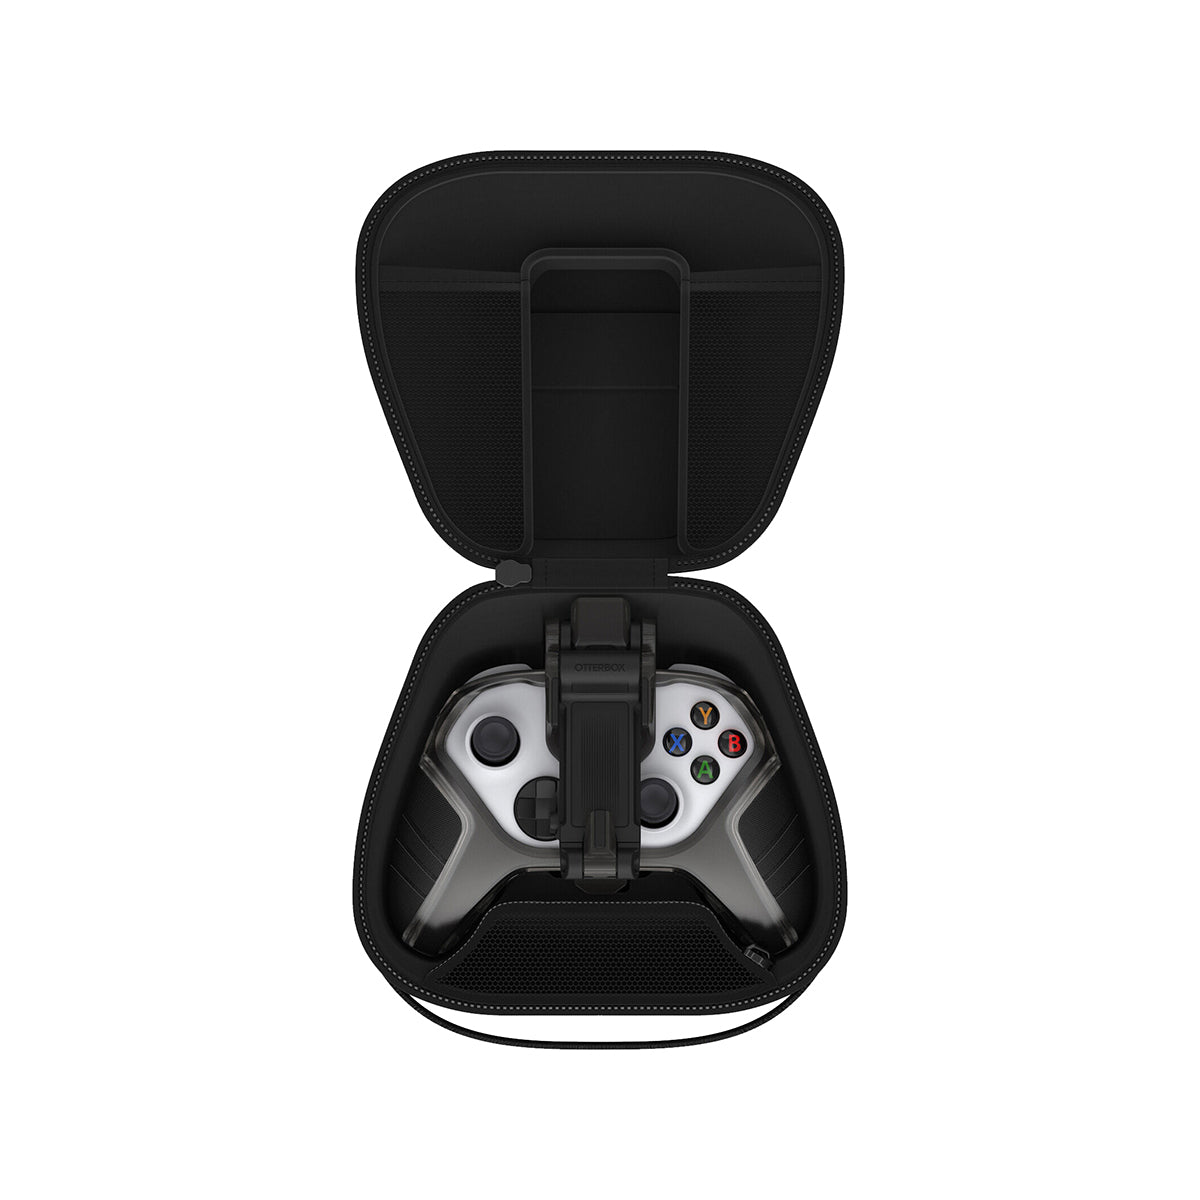 Otterbox Gaming Carry Case For Controller - Black.